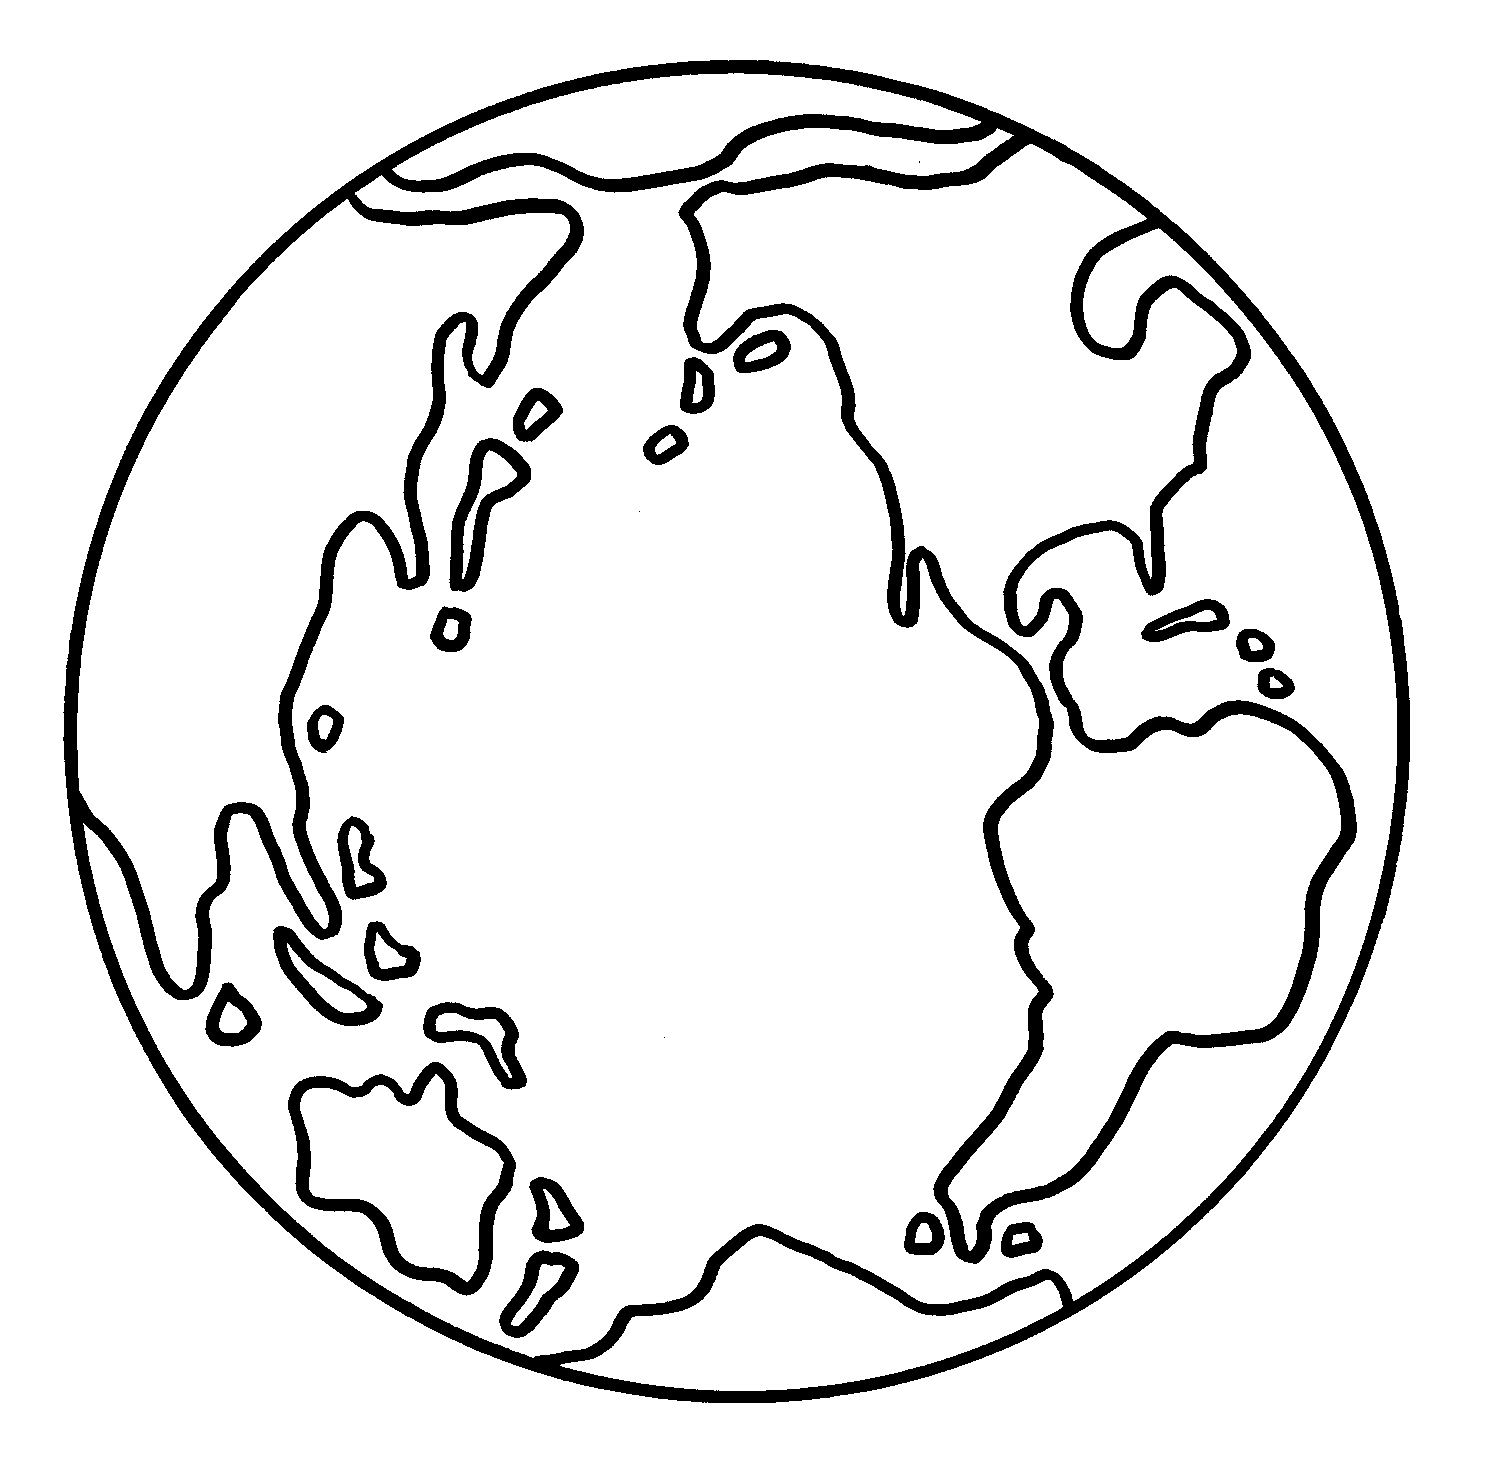 Earth Template Printable | Coloringkids.co